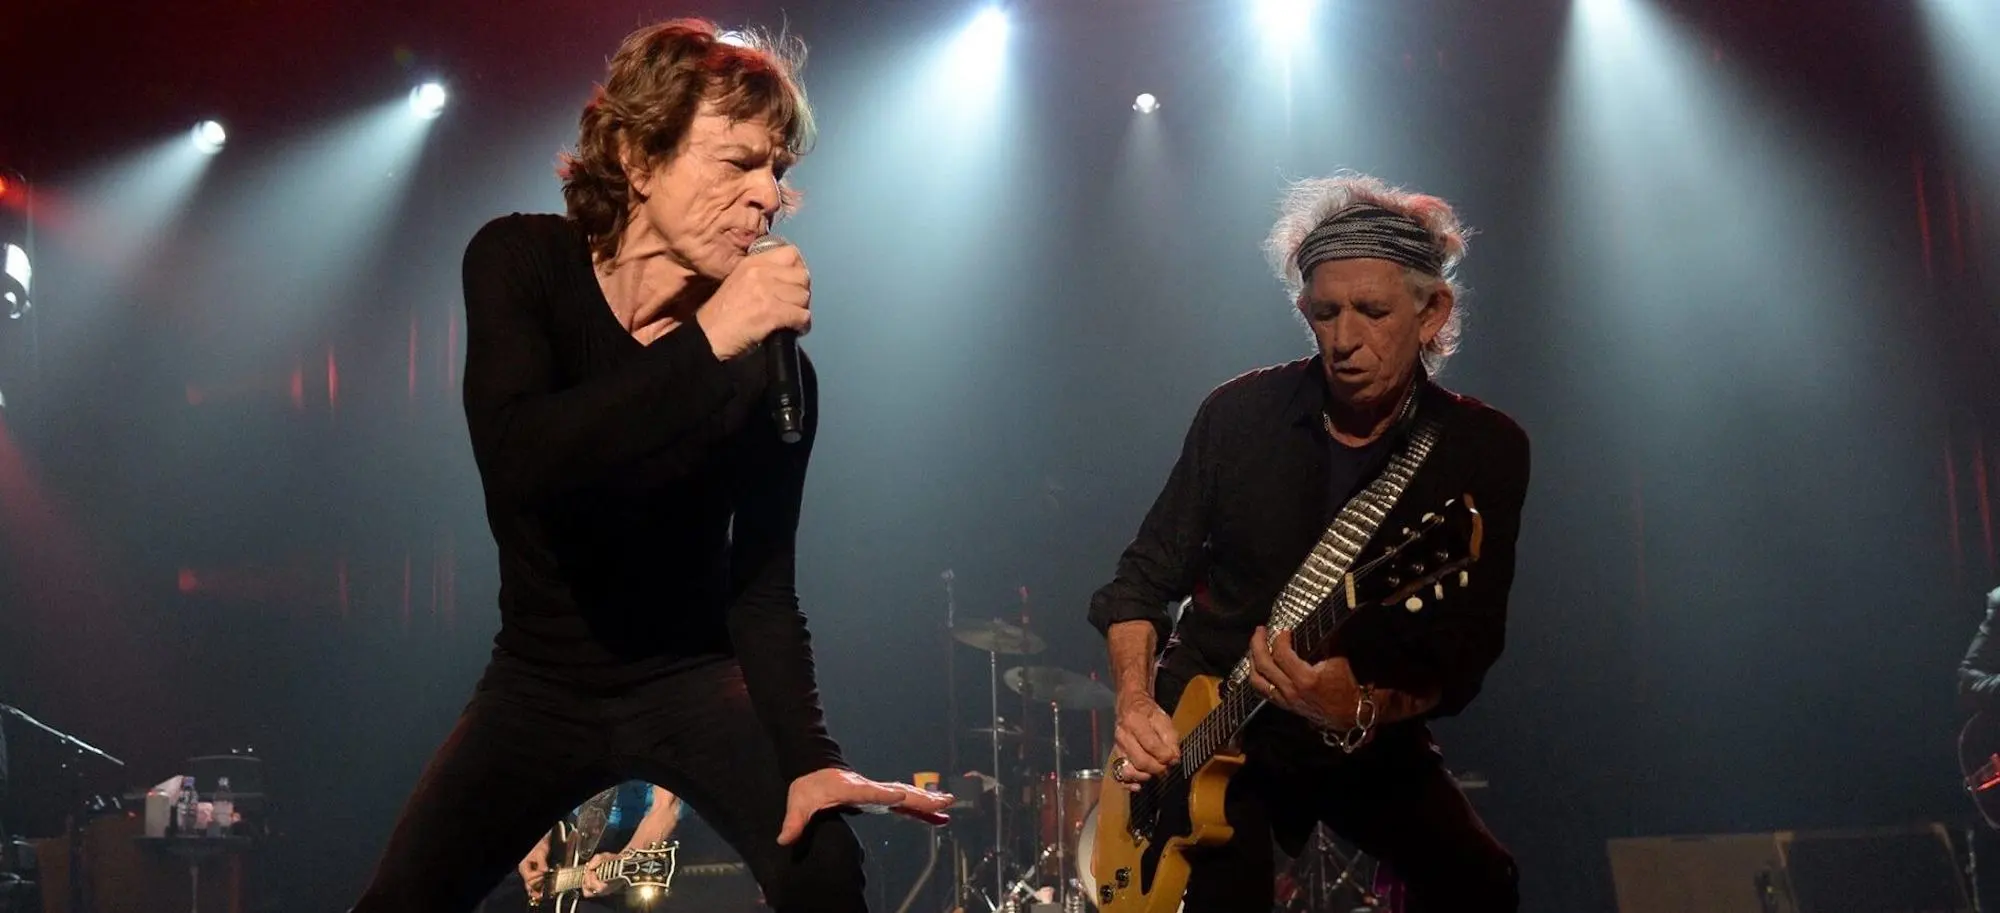 Mick Jagger Talks Rolling Stones, Signature Dance Moves, and the Late Charlie Watts